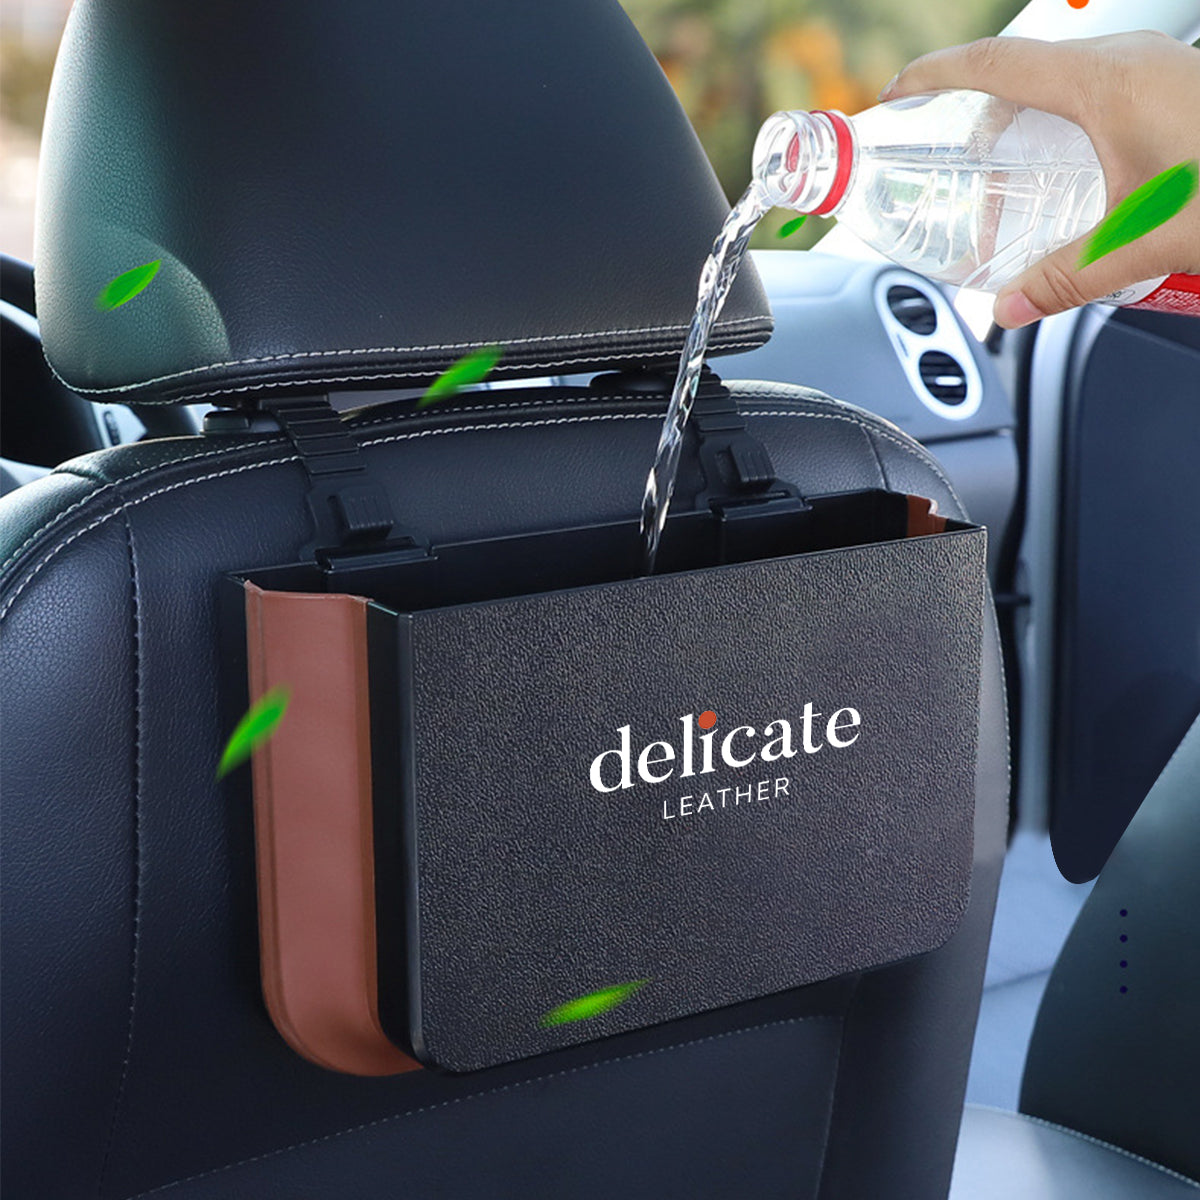 Hanging Waterproof Car Trash can-Foldable, Custom For Your Cars, Waterproof, and Equipped with Cup Holders and Trays. Multi-Purpose, Car Accessories SU11992 - Delicate Leather